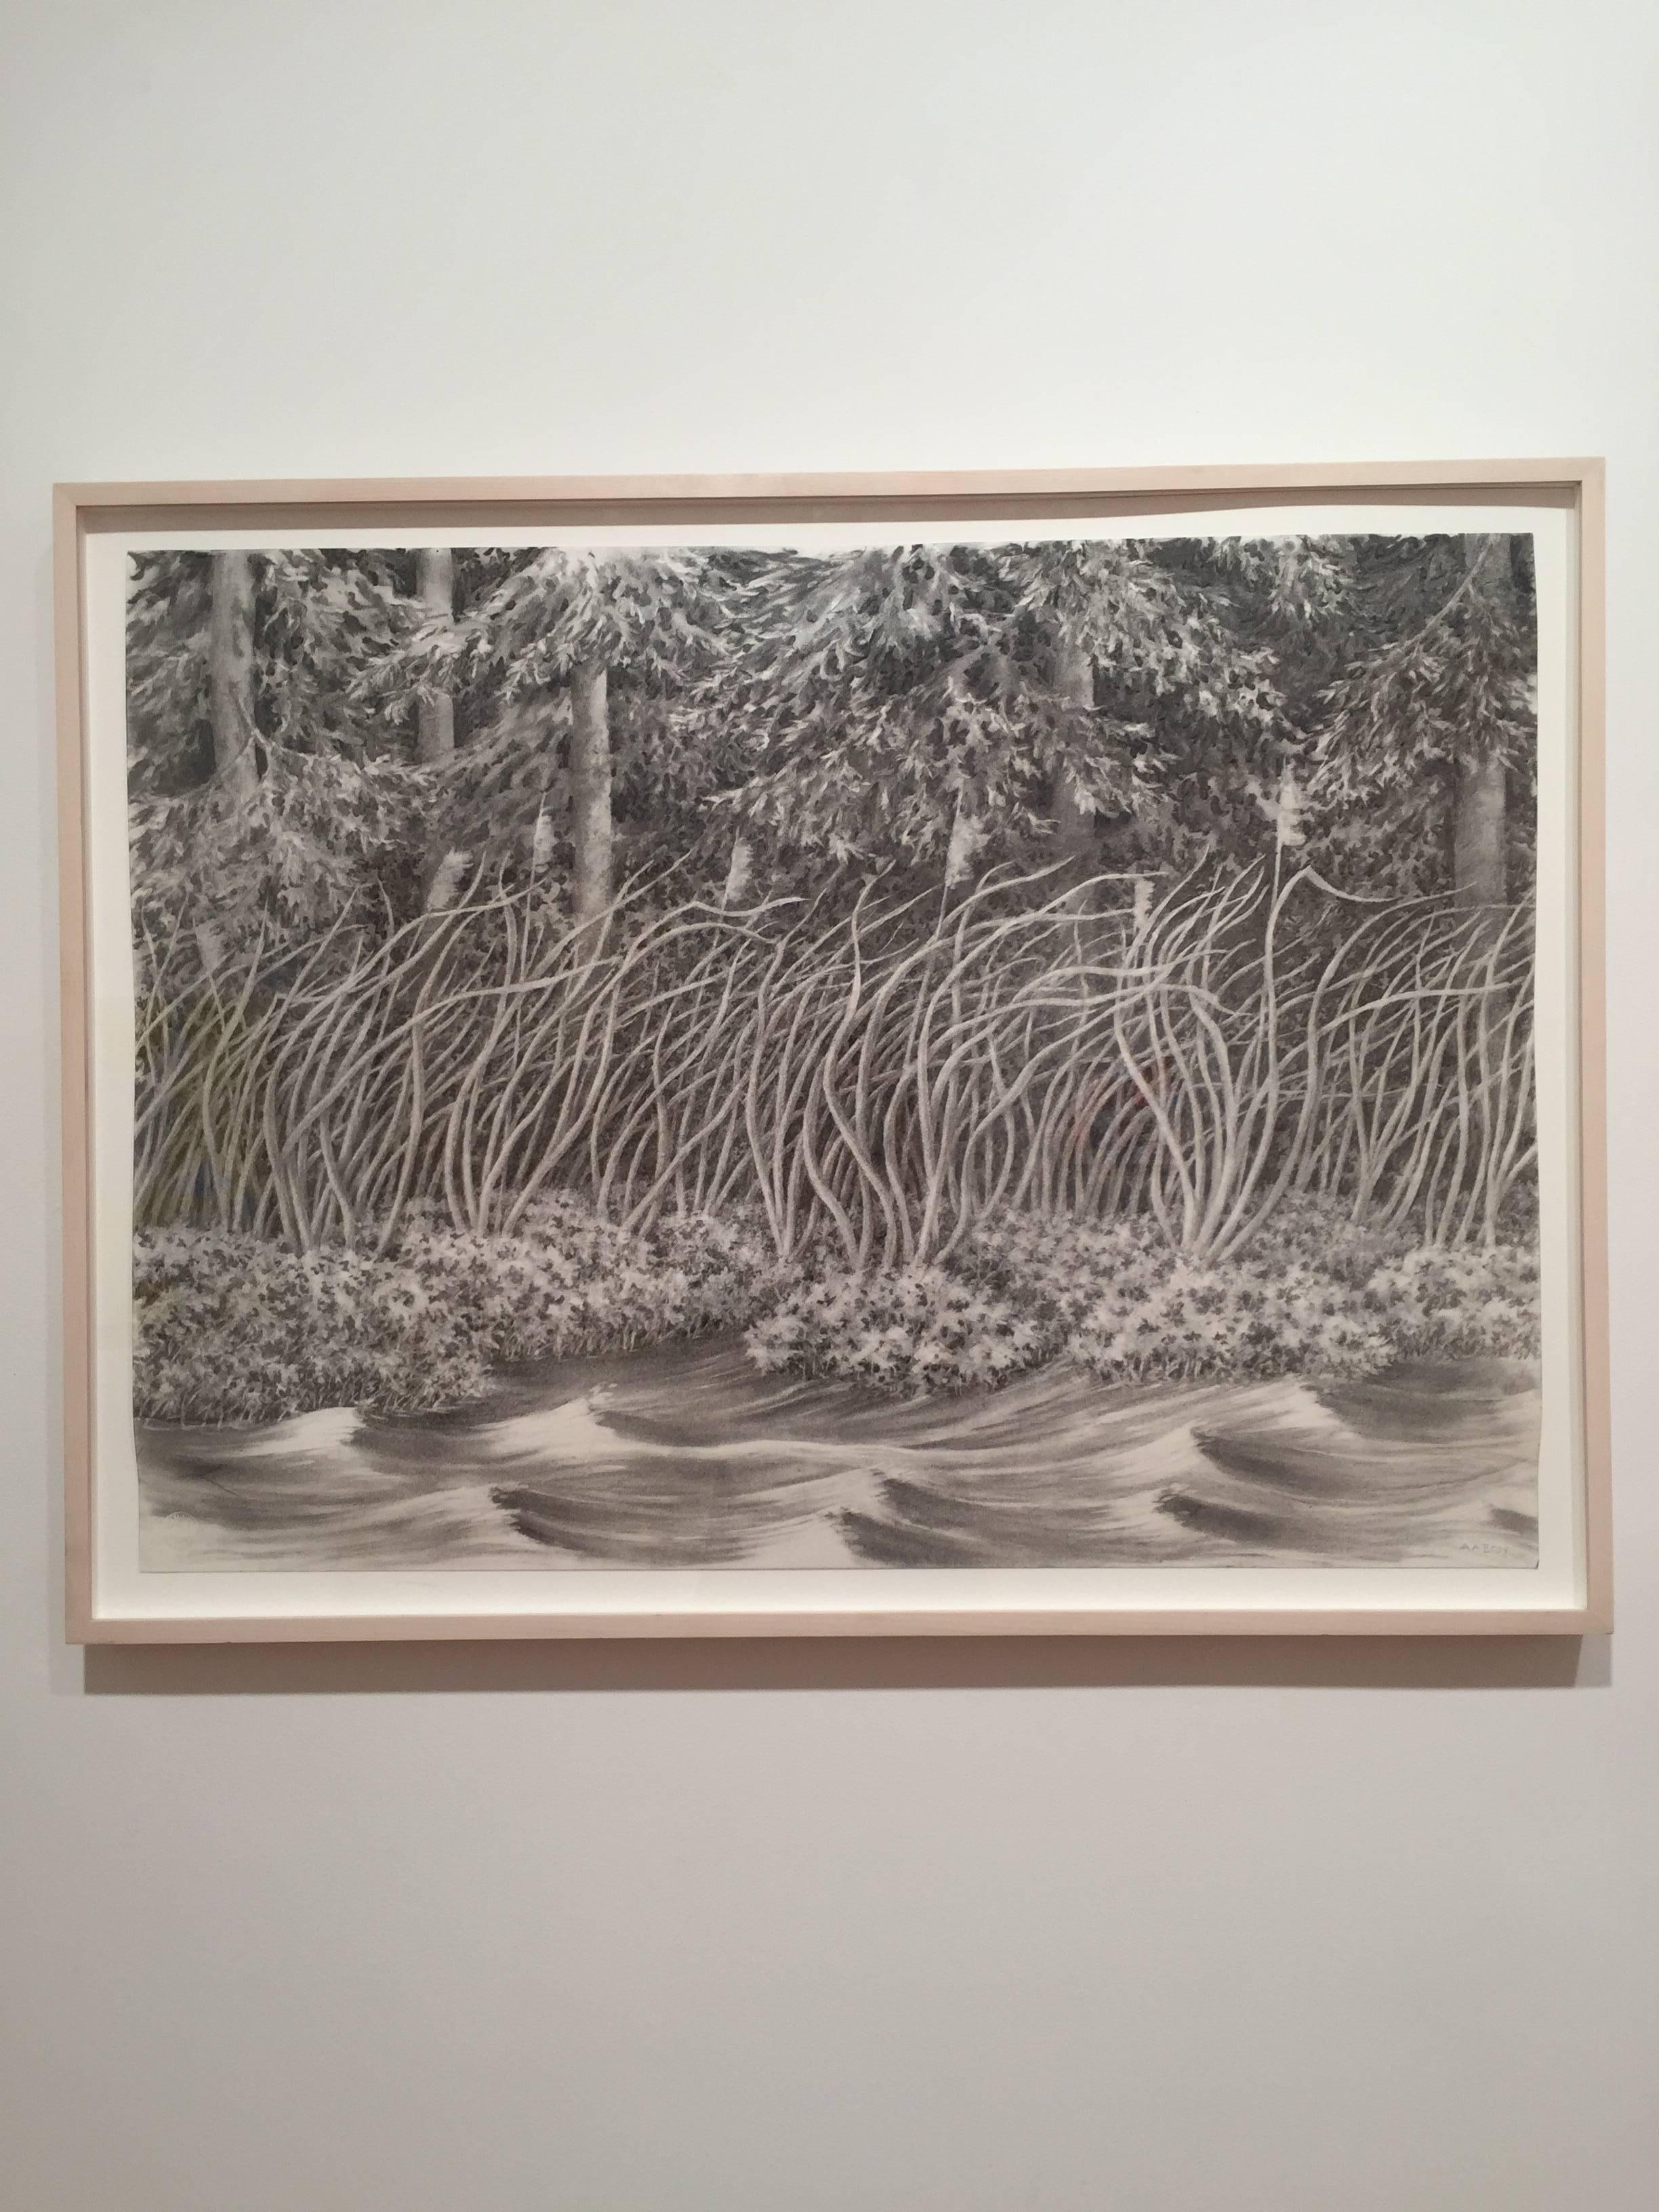 Alan Bray, Four Things in the Wind, charcoal and conte landscape drawing, 2015 1